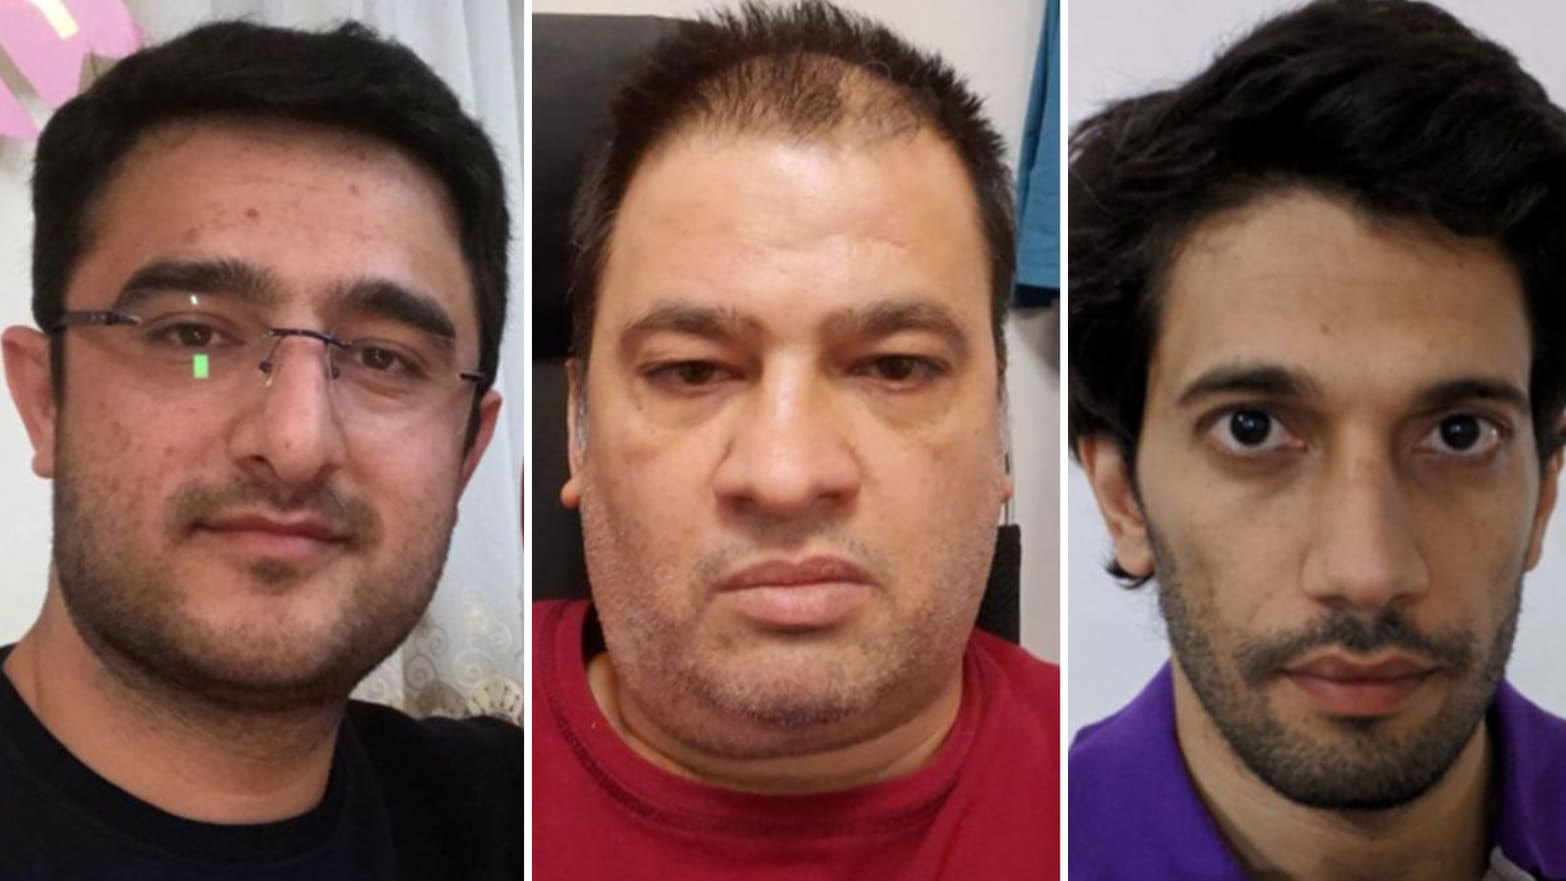 Three Iranian hackers with ties to the Iranian government, known as Charming Kitten or APT35, have been charged by U.S. authorities.